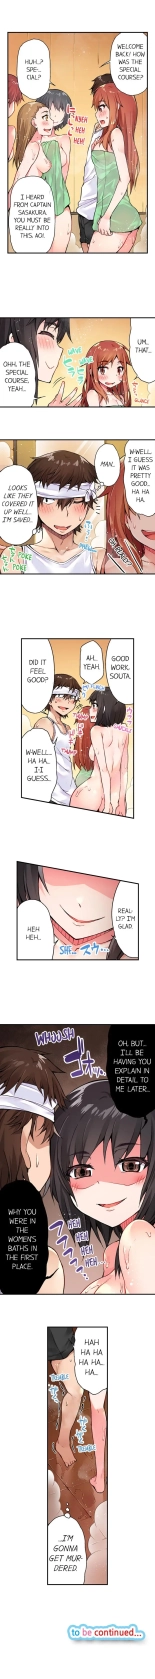 Traditional Job of Washing Girls' Body Ch. 1-189 : page 136